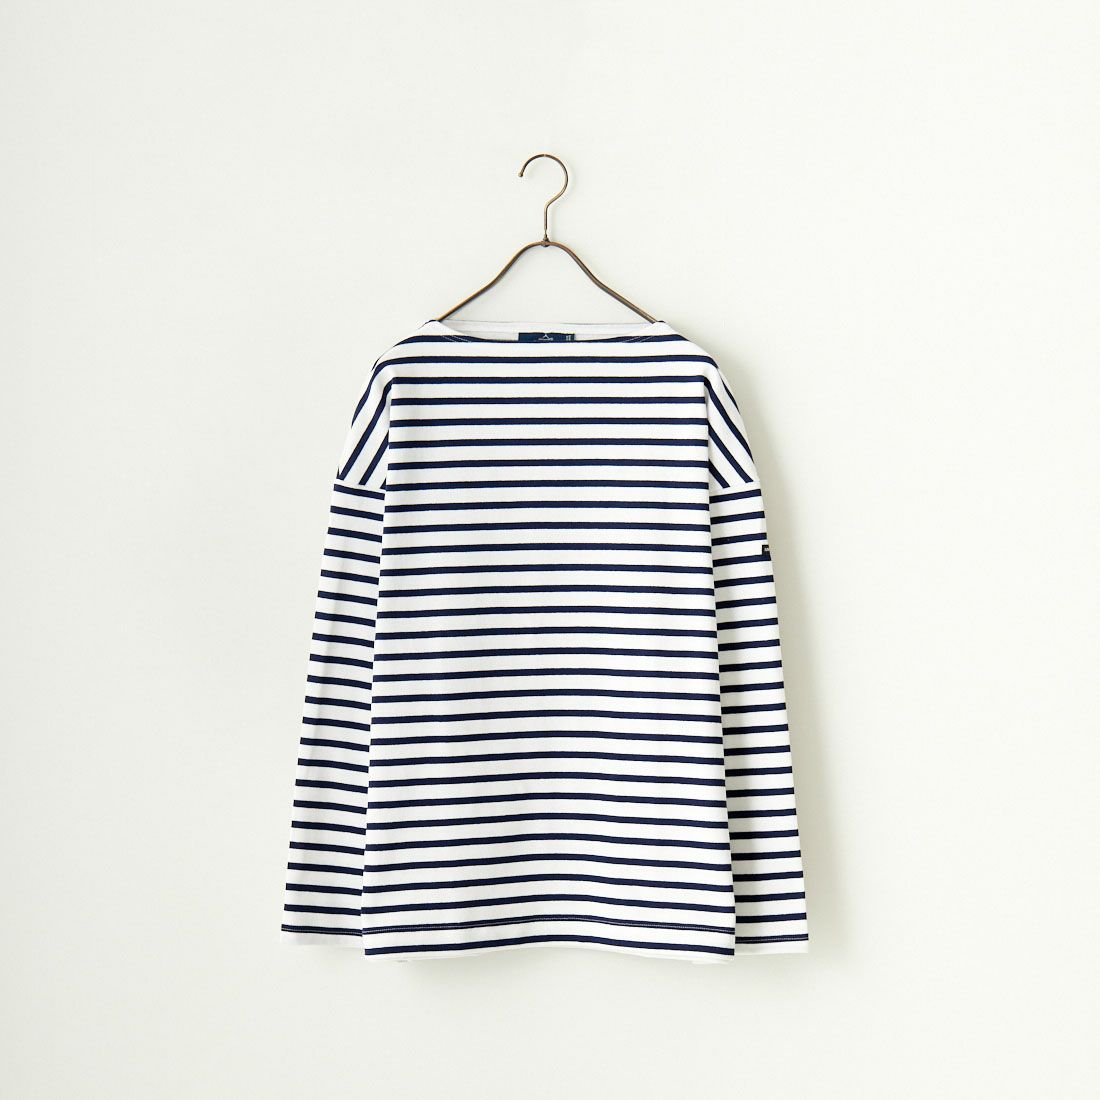 ST.JAMES [セントジェームス] 厚手ルーズドロップTシャツ [20JC-OUESS-LOOSE] NEI/MAR